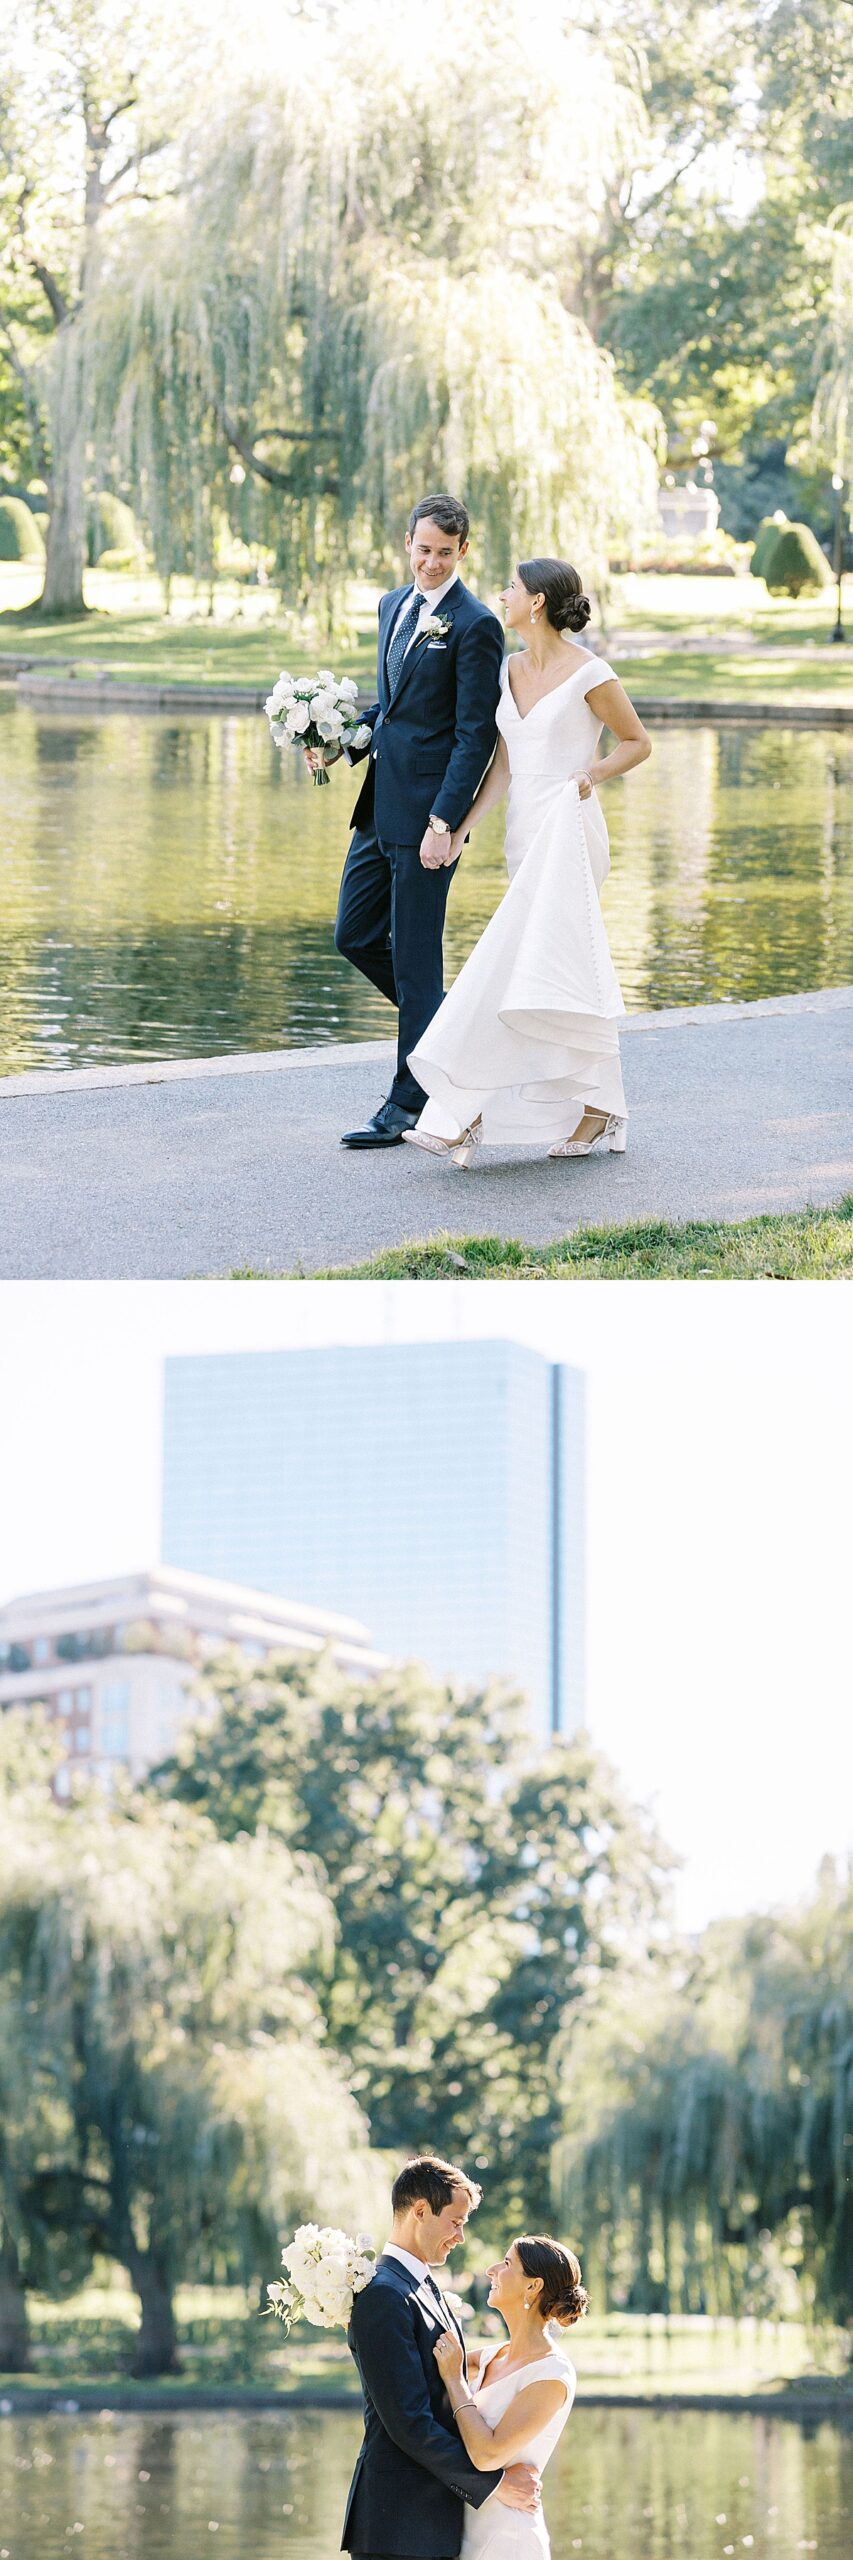 bride and groom walking in Boston Public Garden captured by Lynne Reznick Photography 